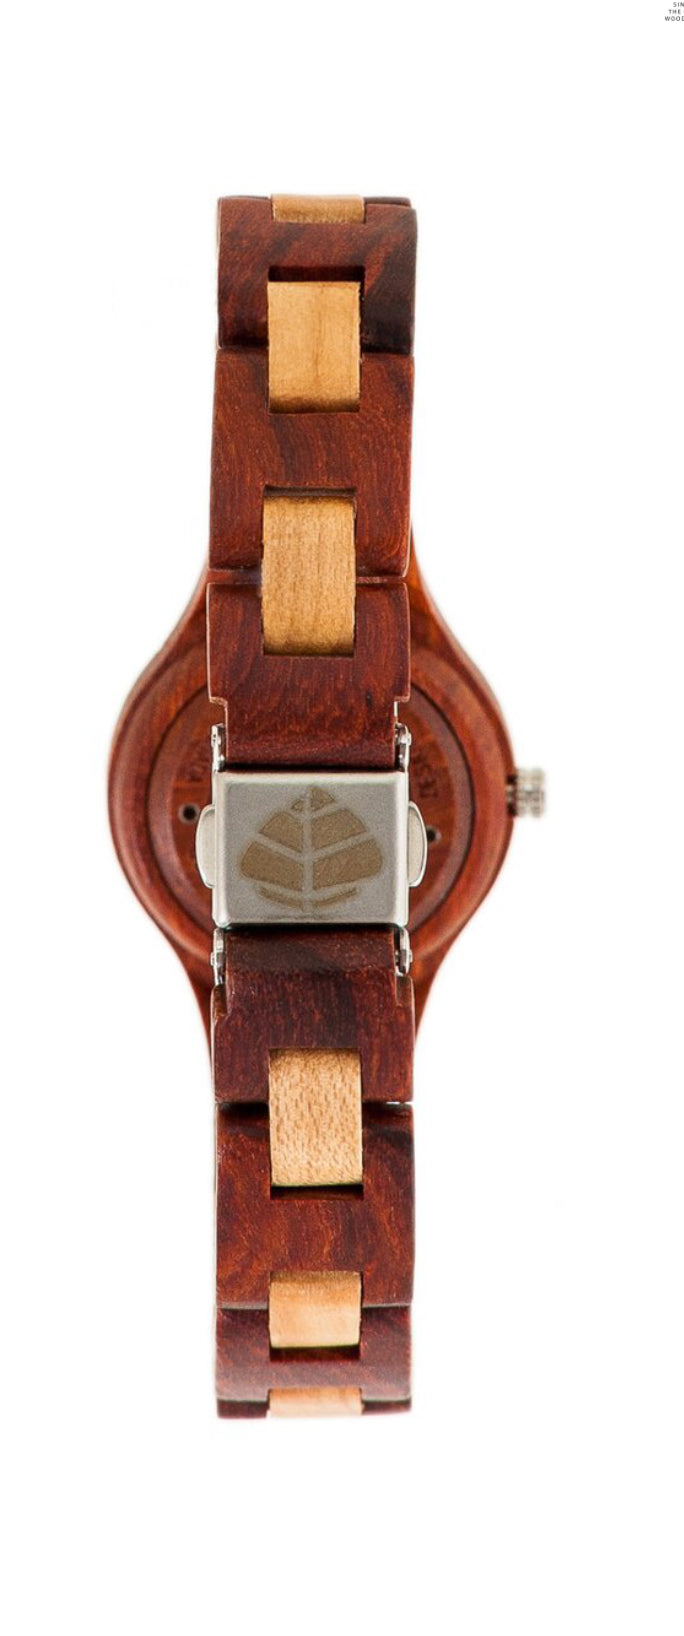 Tense Ladies Wood Watches Small Pacific Katalox/Maplewood Locally Hand Made